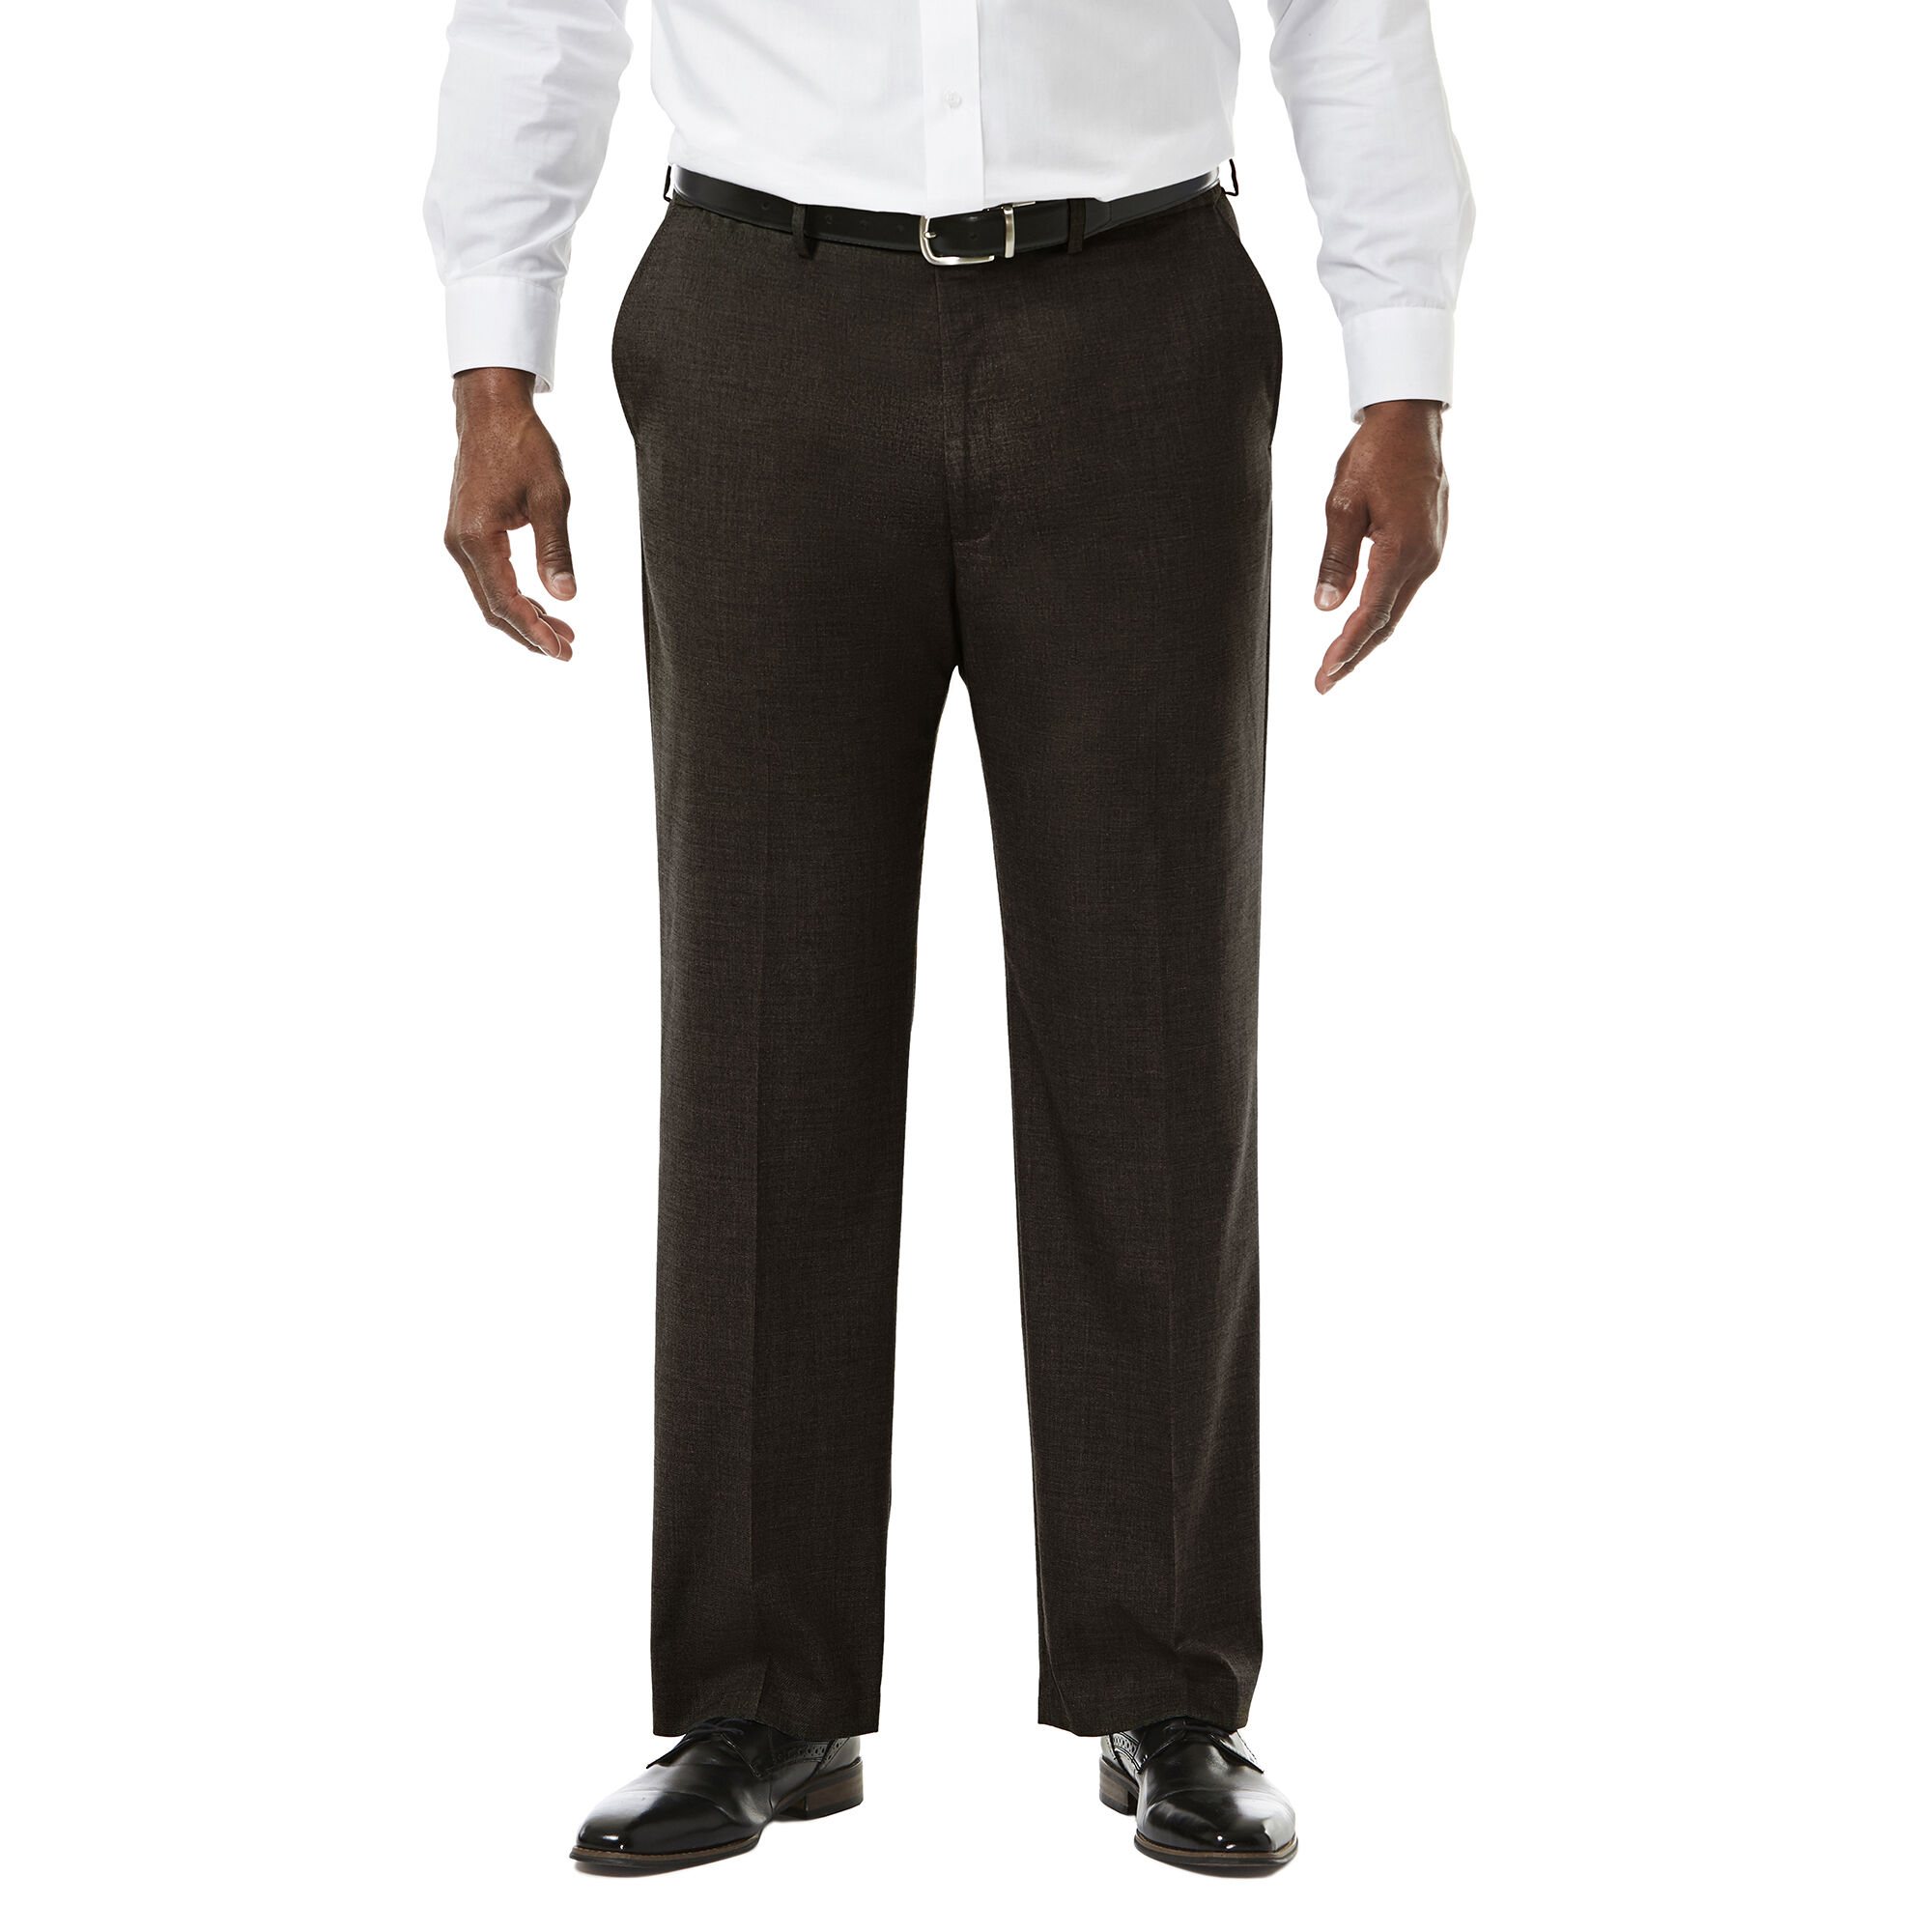 Big & Tall J.M. Haggar Premium Stretch Suit Pant - Flat Front Chocolate Big & Tall Classic Fit Flat Front Hidden Expandable Waistband: Expands up to 3" 64% Polyester, 34% Viscoe Rayon 2% Spandex Dry Clean Only Imported Style #: HY90182 Size - NoSz